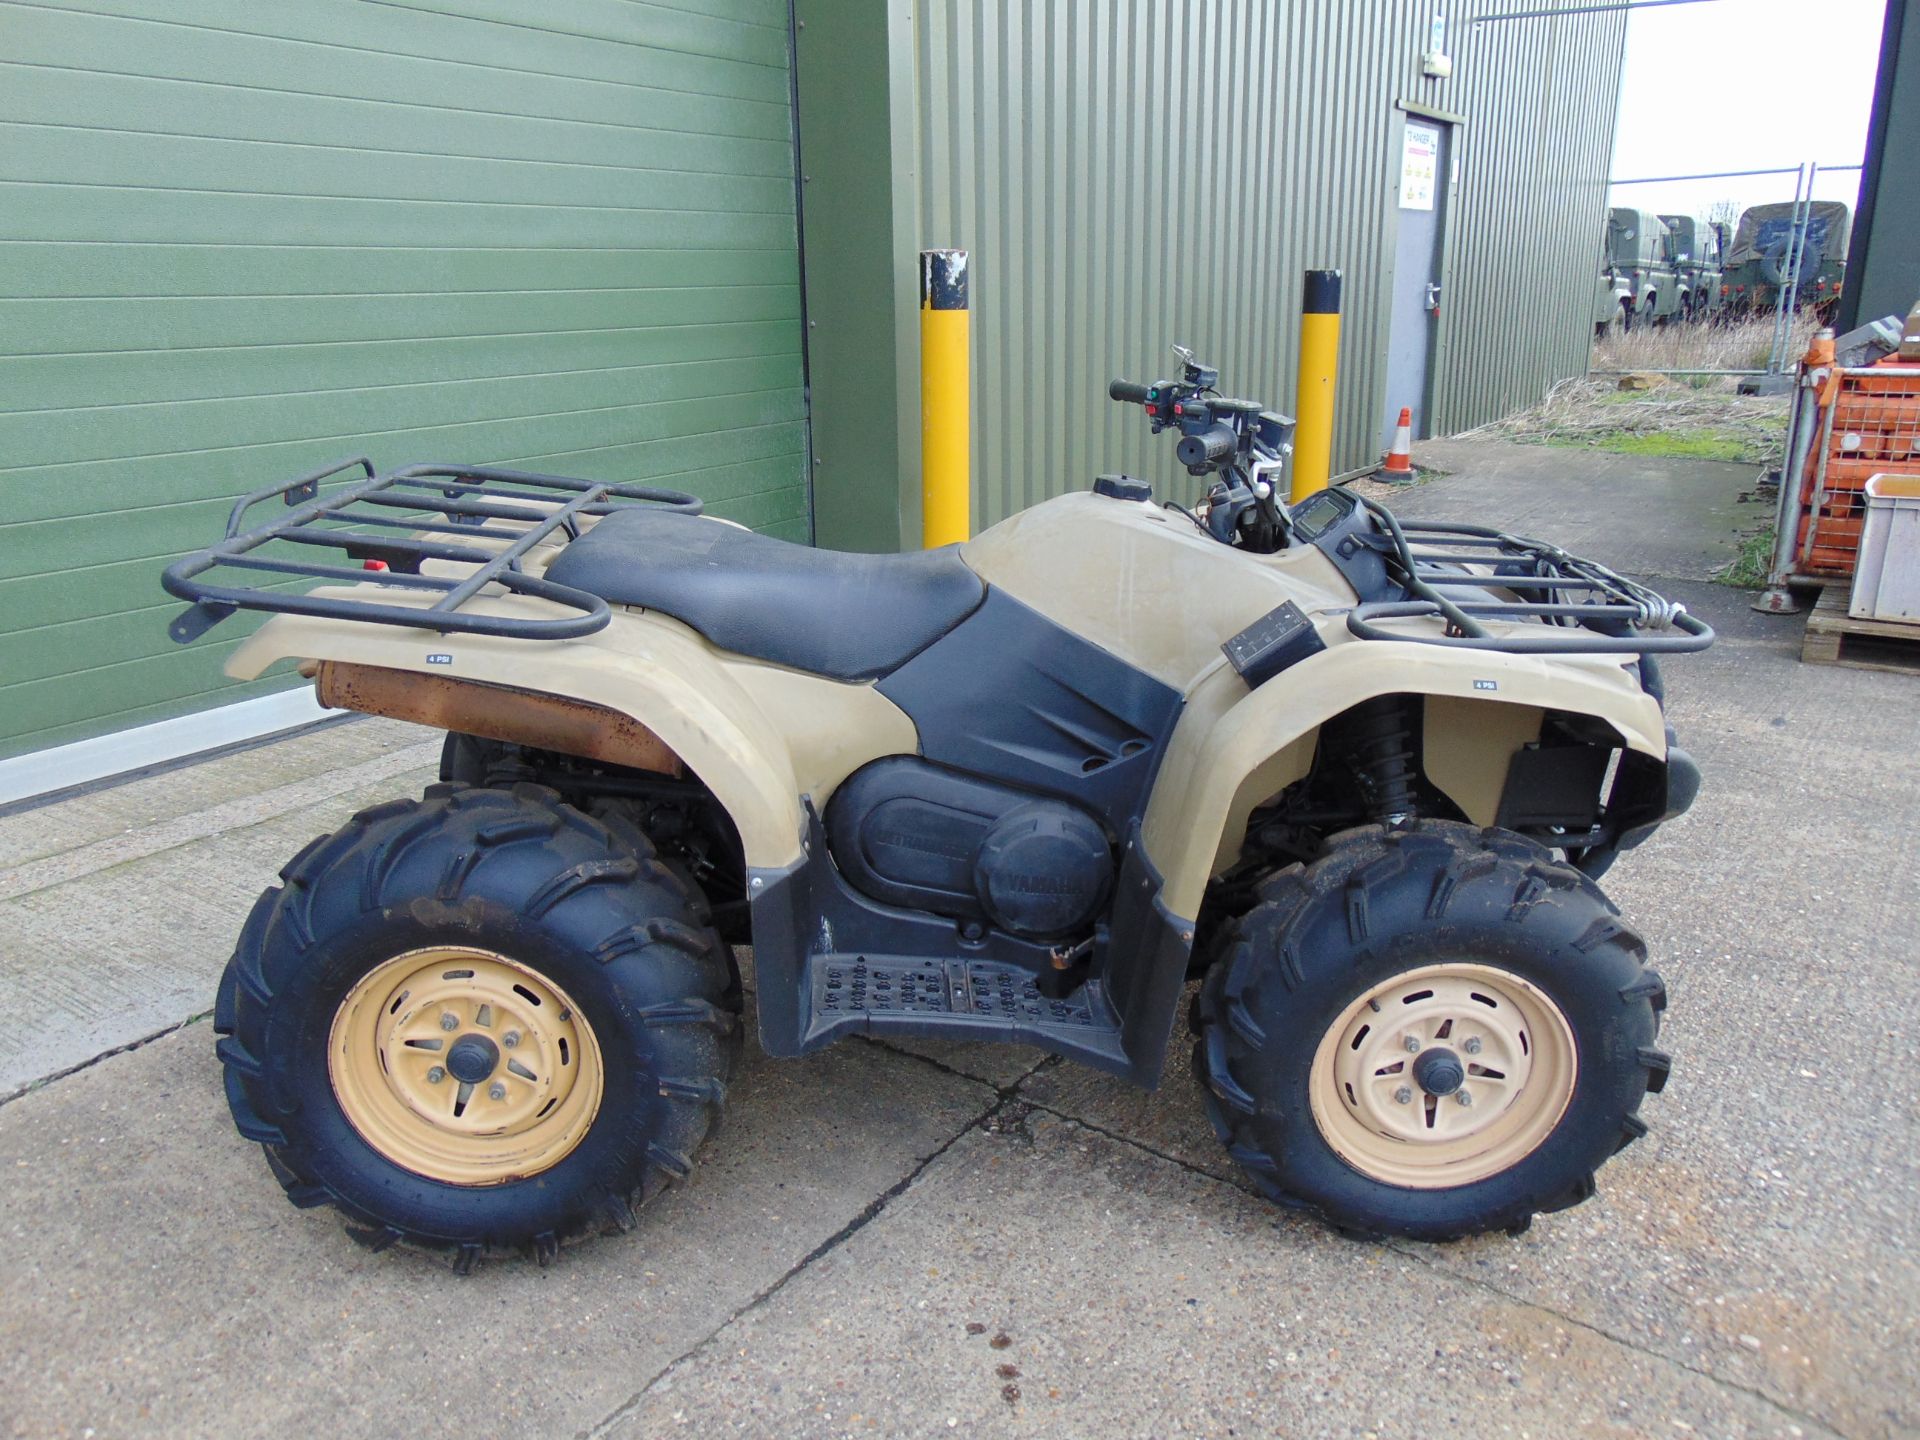 Military Specification Yamaha Grizzly 450 4 x 4 ATV Quad Bike Complete with Winch ONLY 591 HOURS! - Image 5 of 16